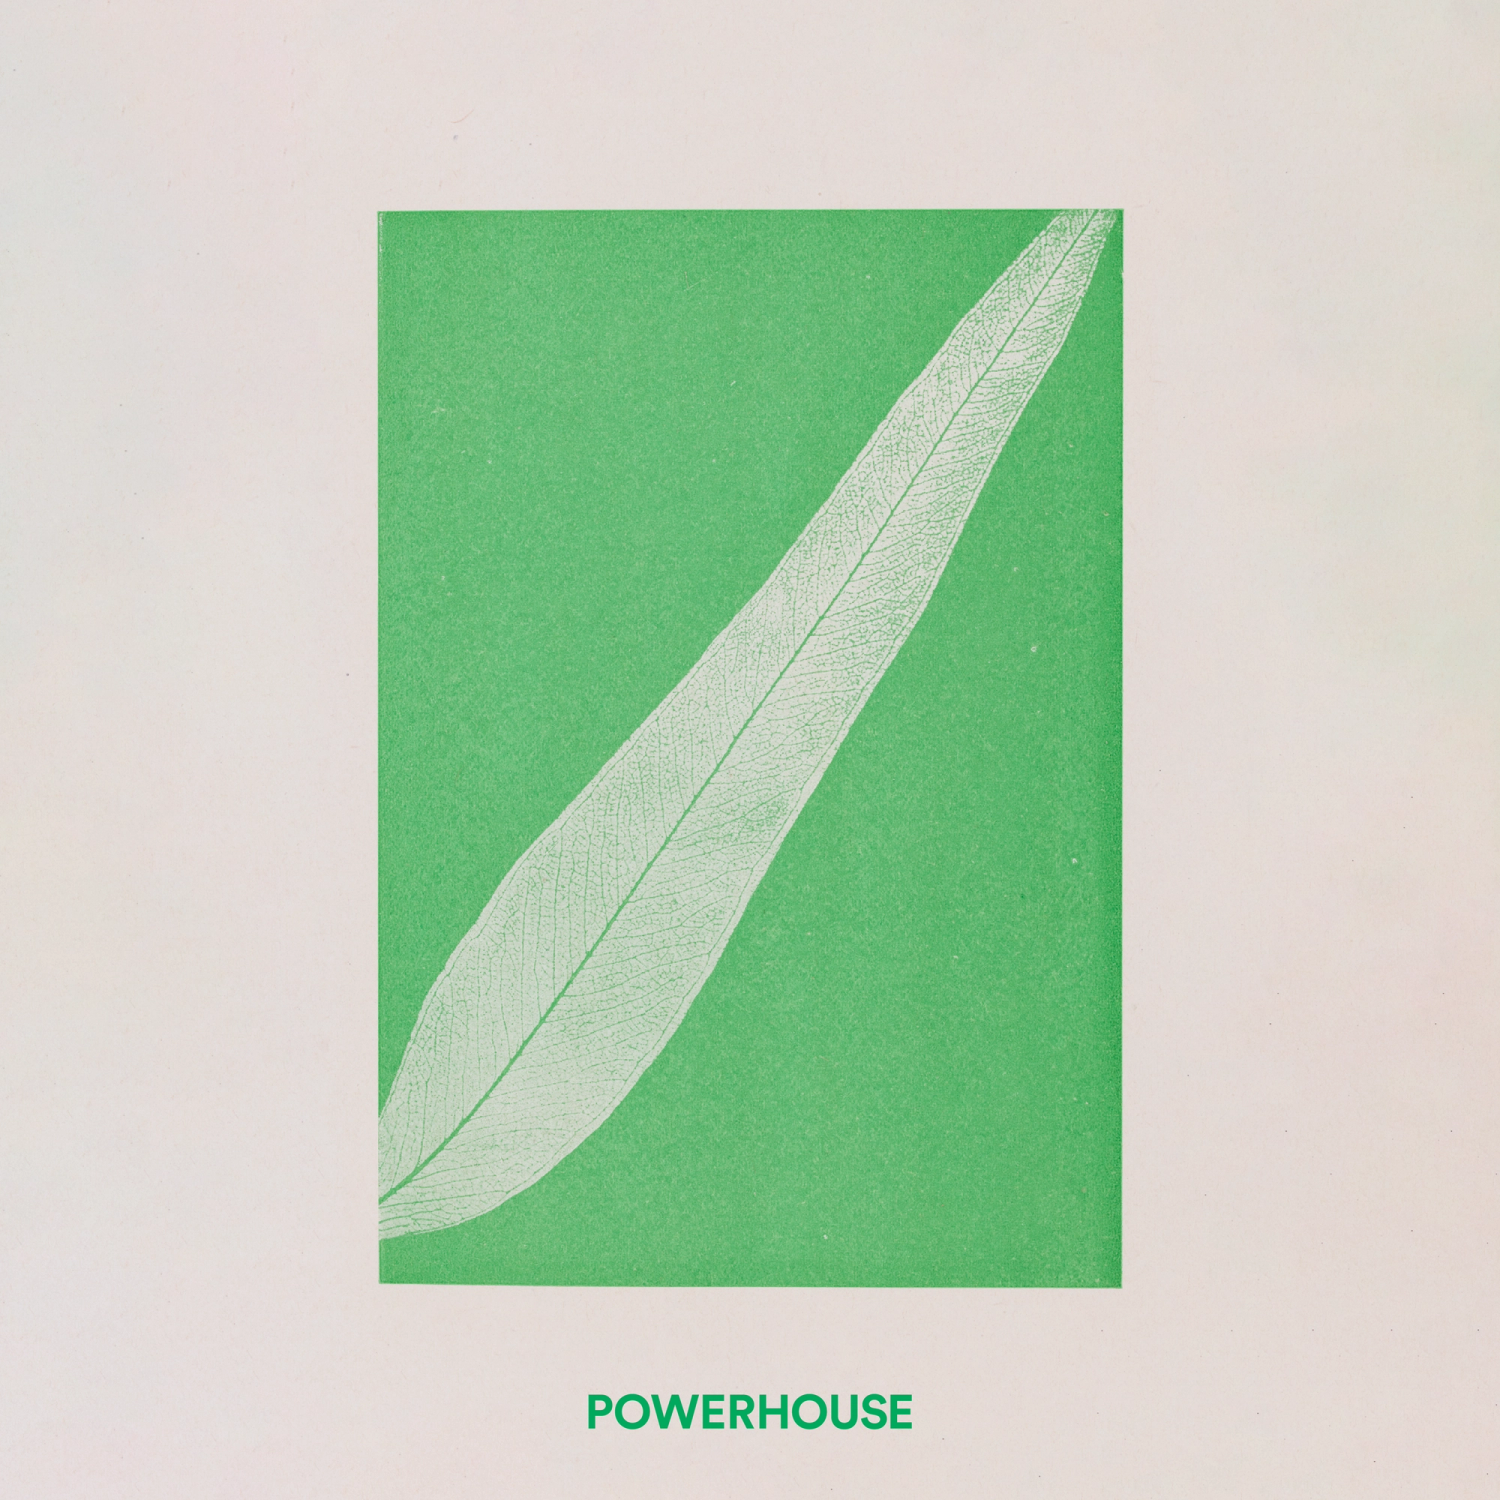 An illustration of a eucalyptus leaf on a green background. The text ‘Powerhouse’ is written below in green.